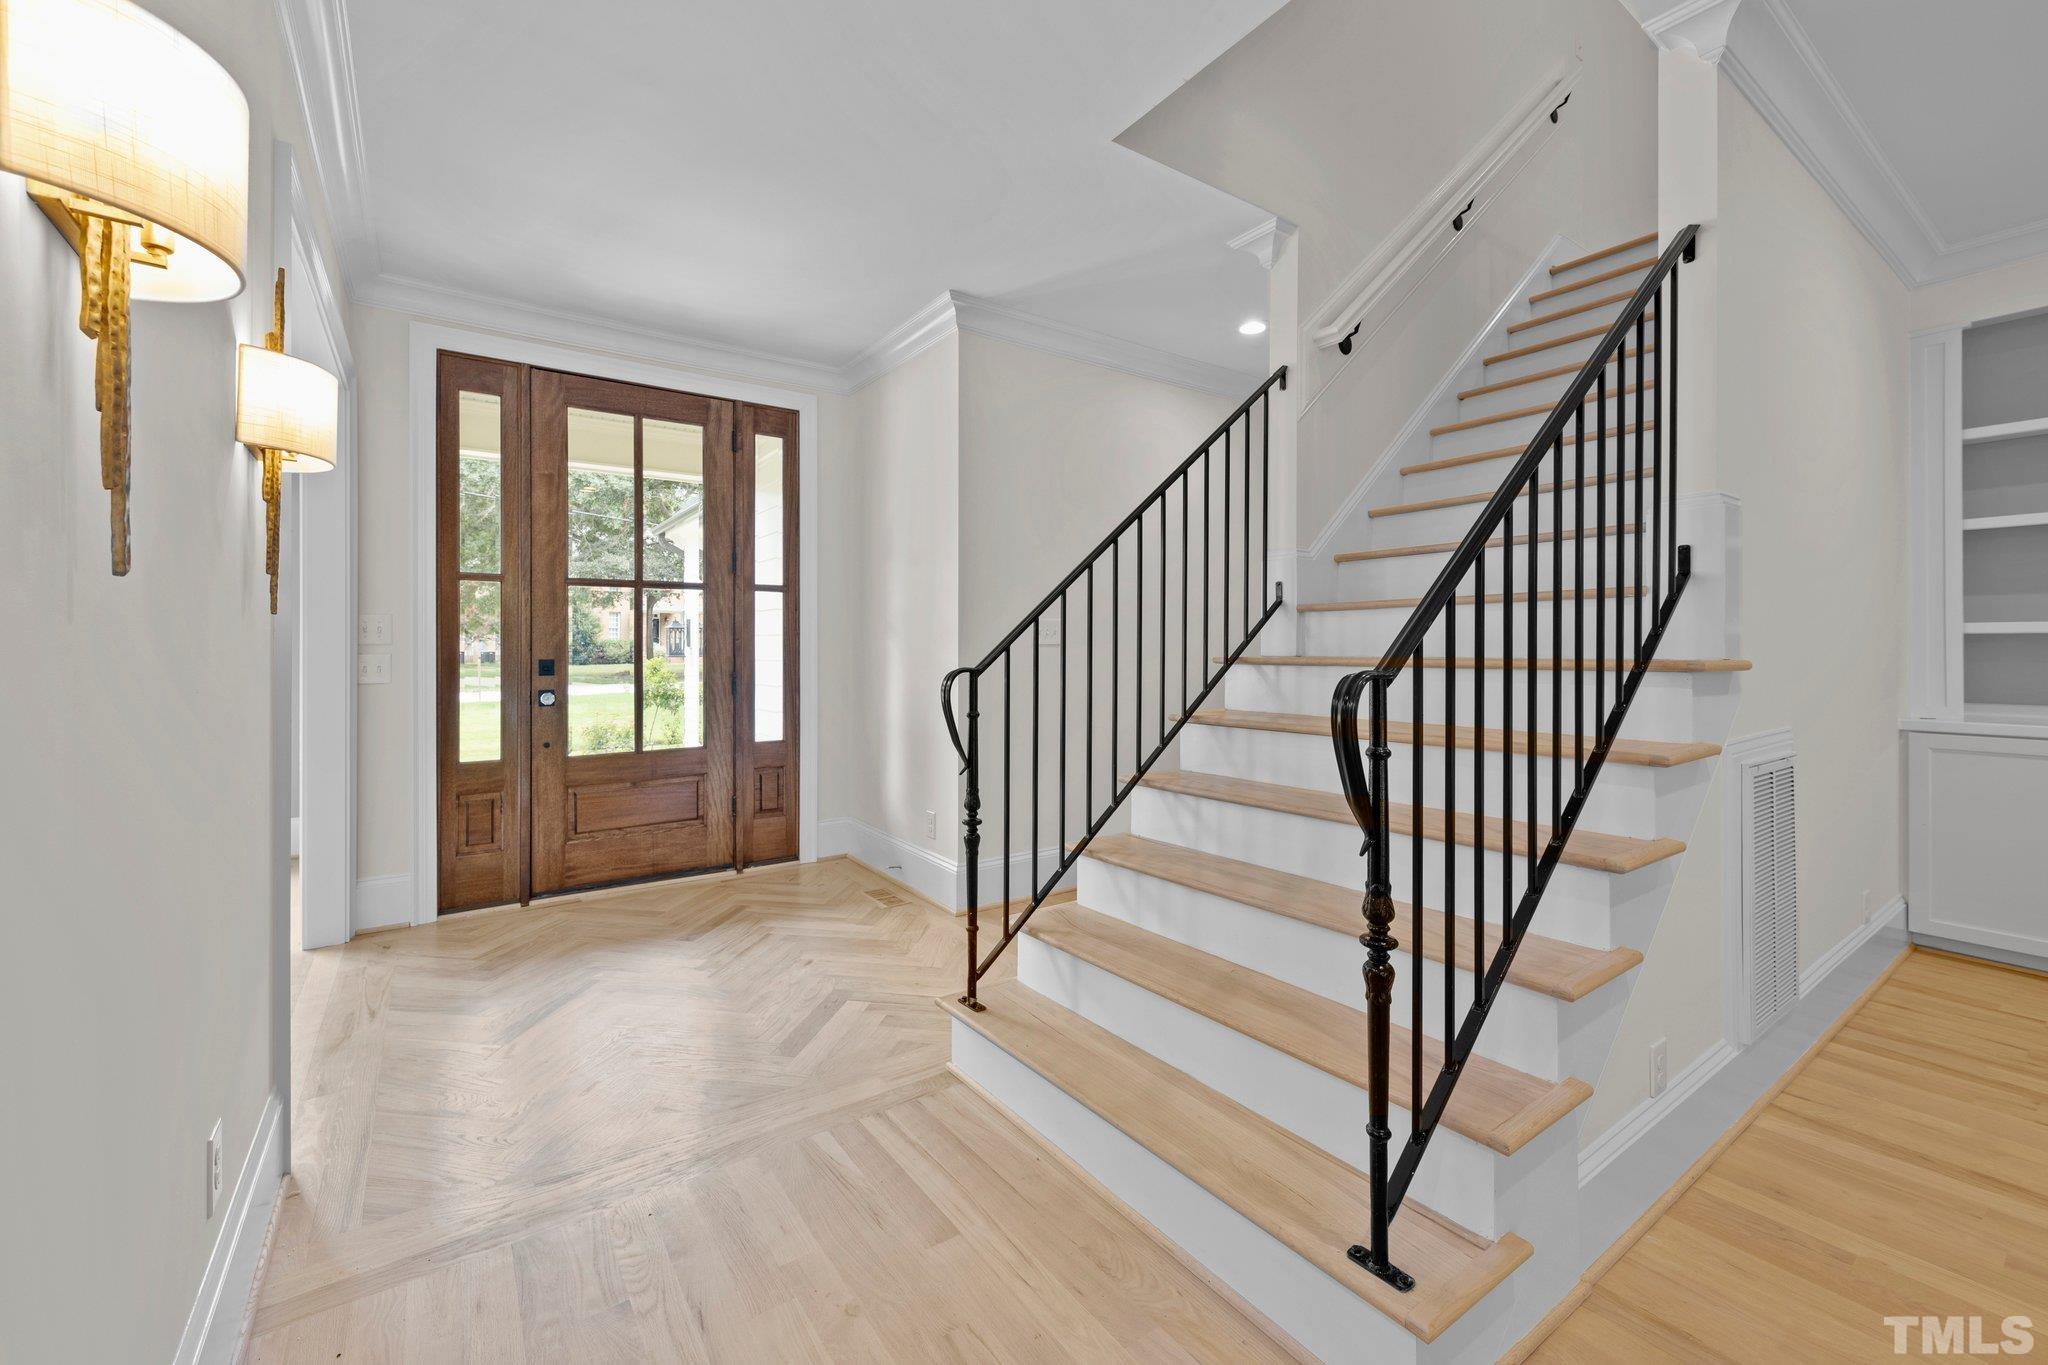 Inviting entry into the foyer with hardwood floors through the 1st floor.